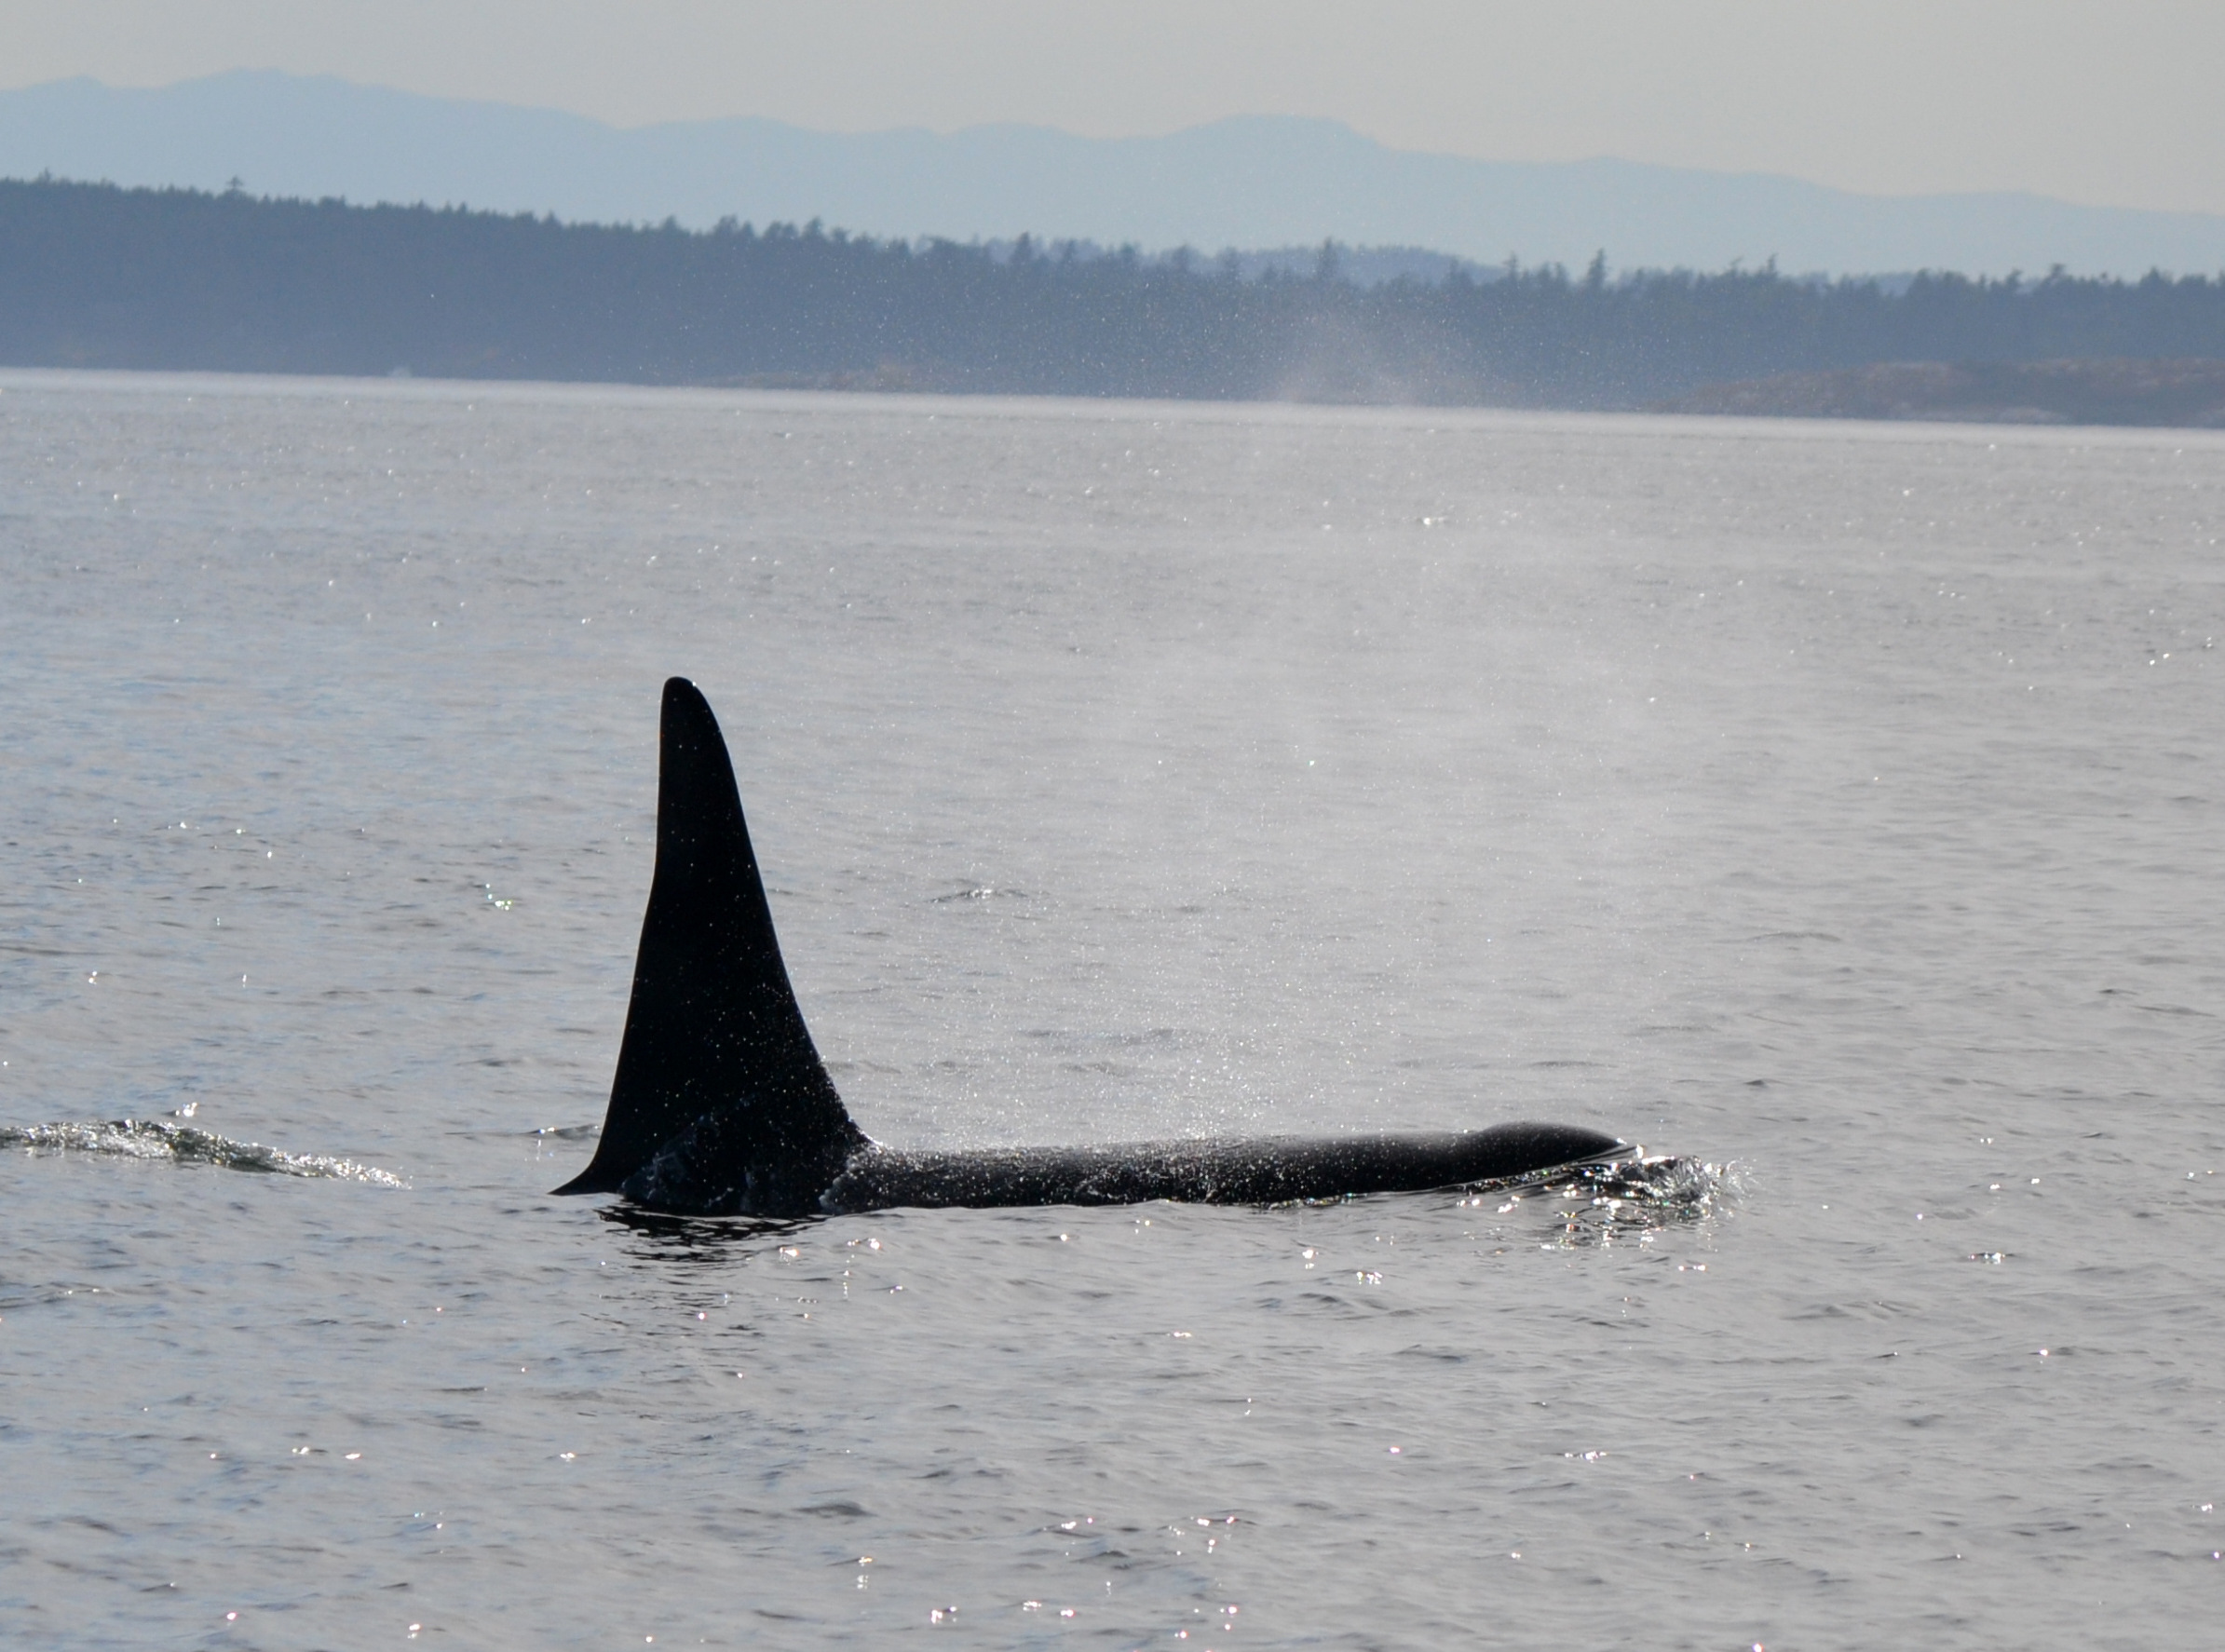 Orcas frequent the waters around San Juan Island